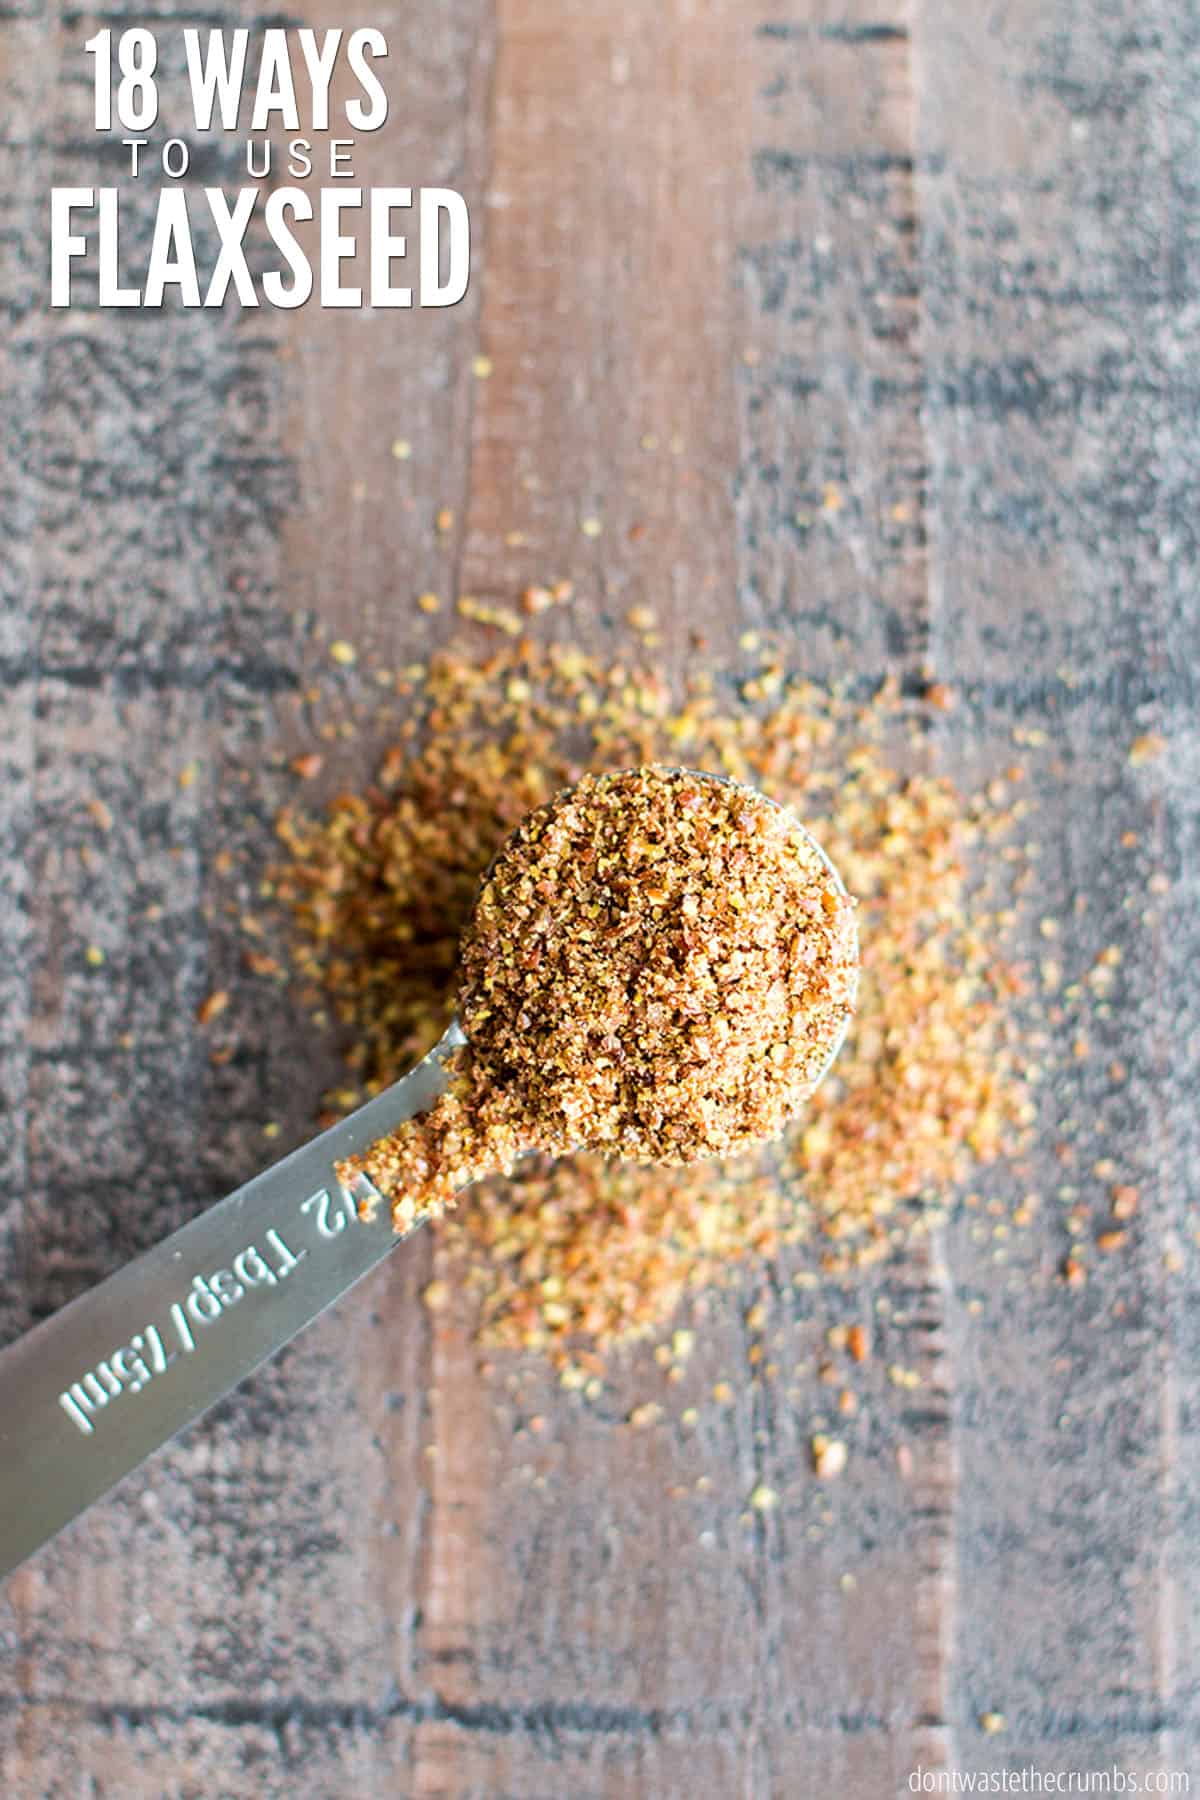 A stainless steel measuring spoon heaping full of milled flaxseeds. Some of the flaxseed meal is spilled over onto the table. The text overlay reads, "18 Ways to Use Flaxseeds."